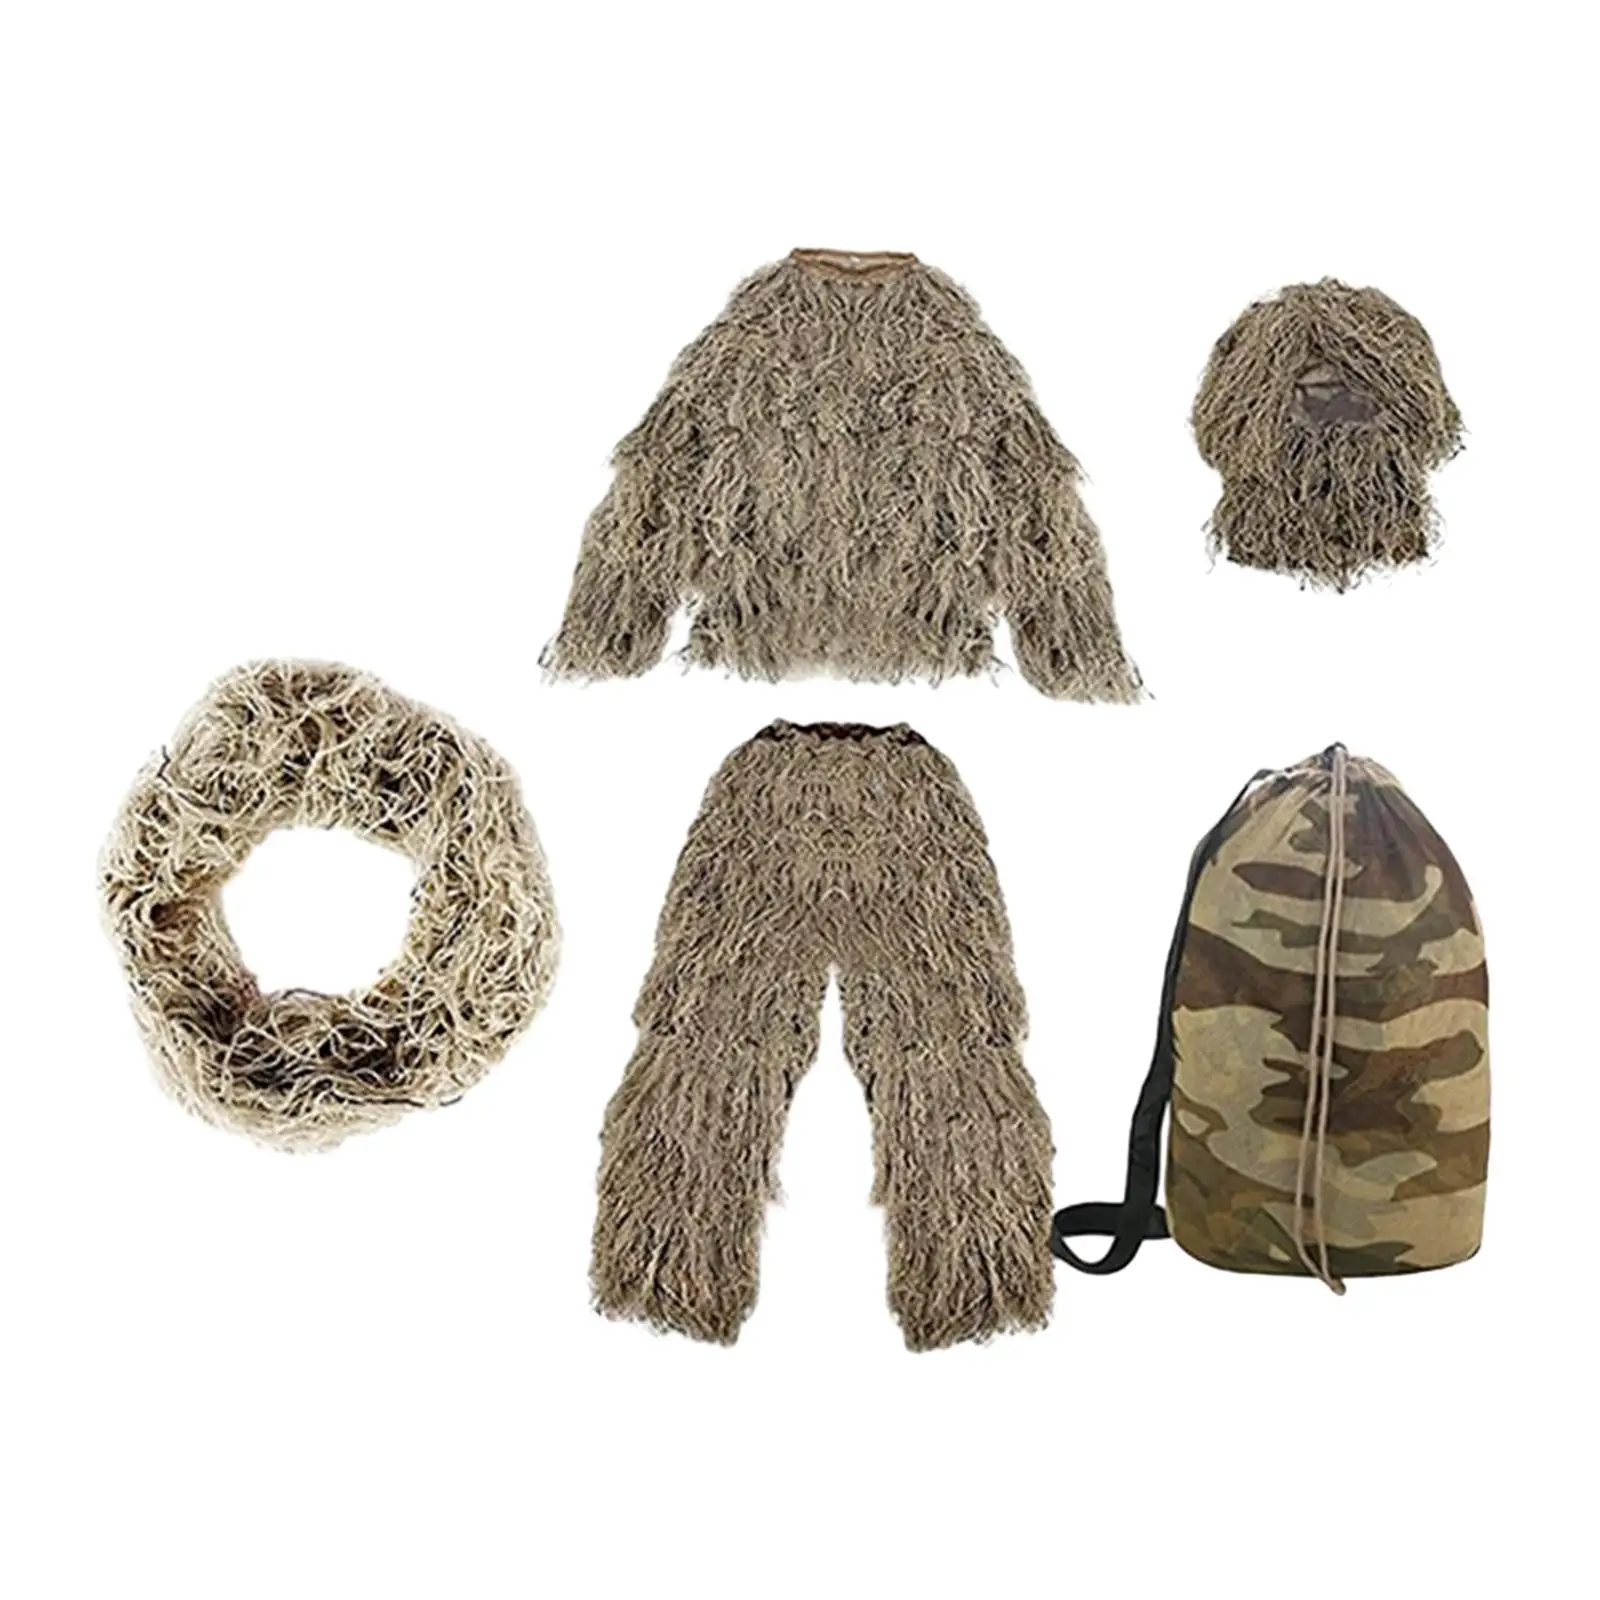 Children Ghillie Suit with Storage Bag Disguise Jacket Clothing Uniform Set for Photography Party Hunting Birdwatching Halloween